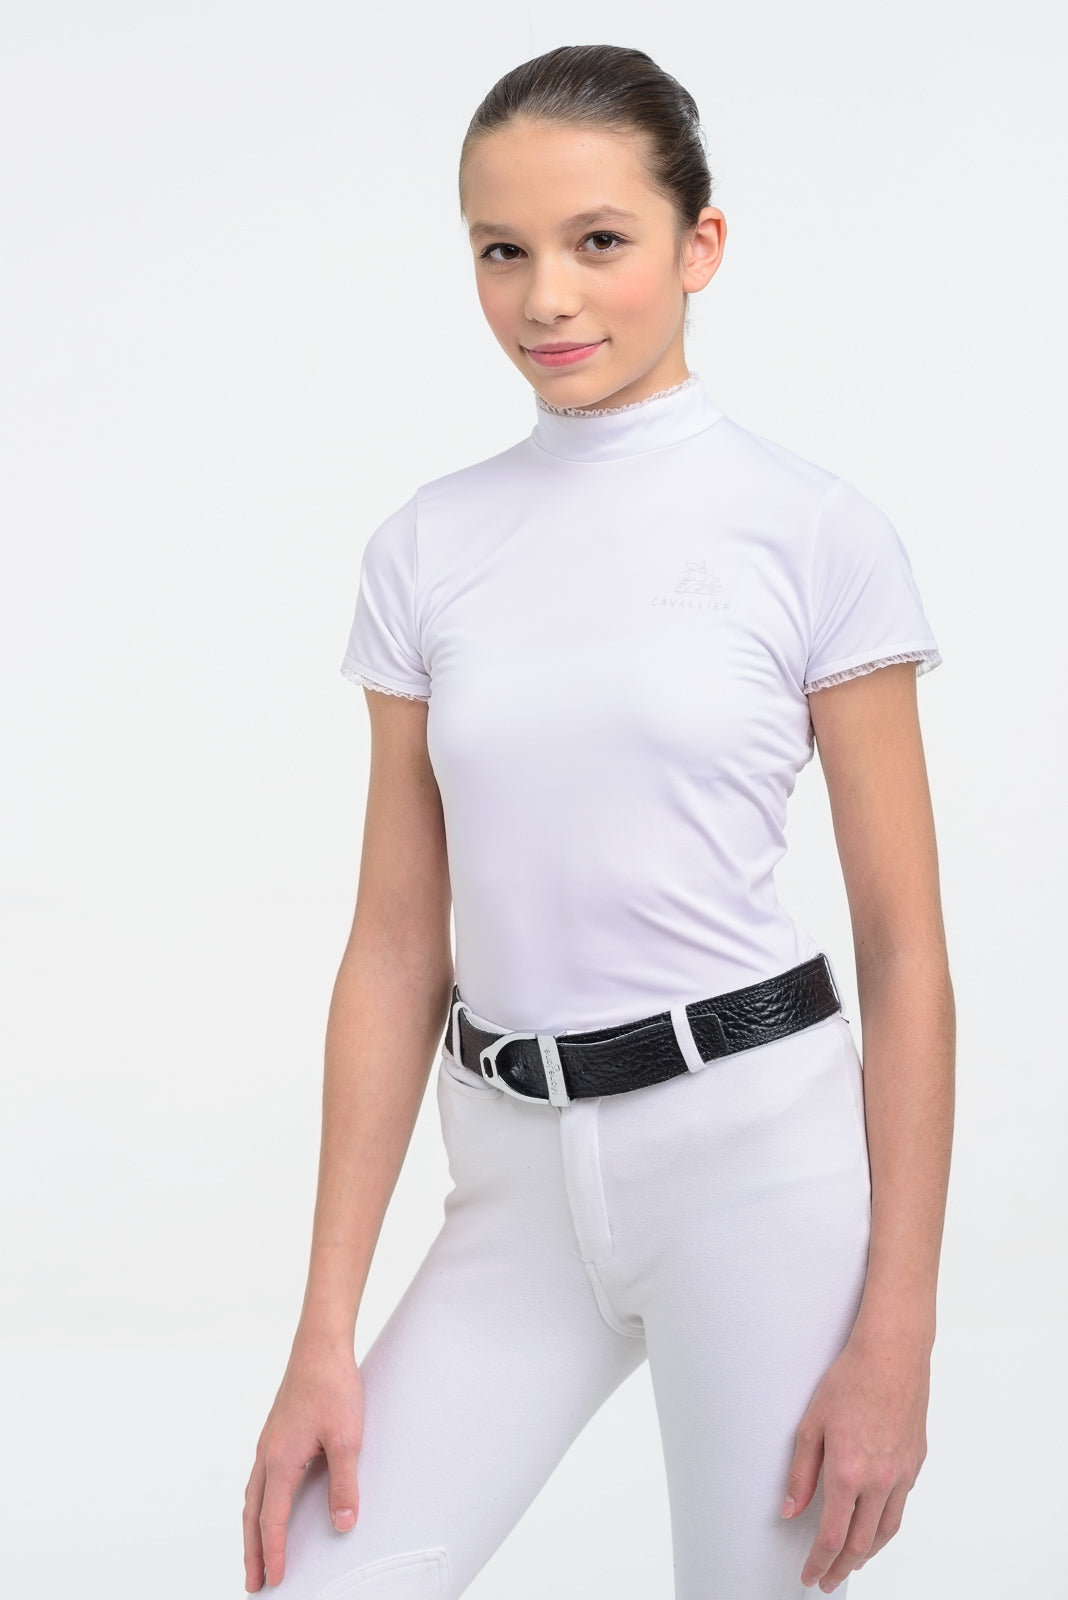 Girls White Dressage Competition Shirt